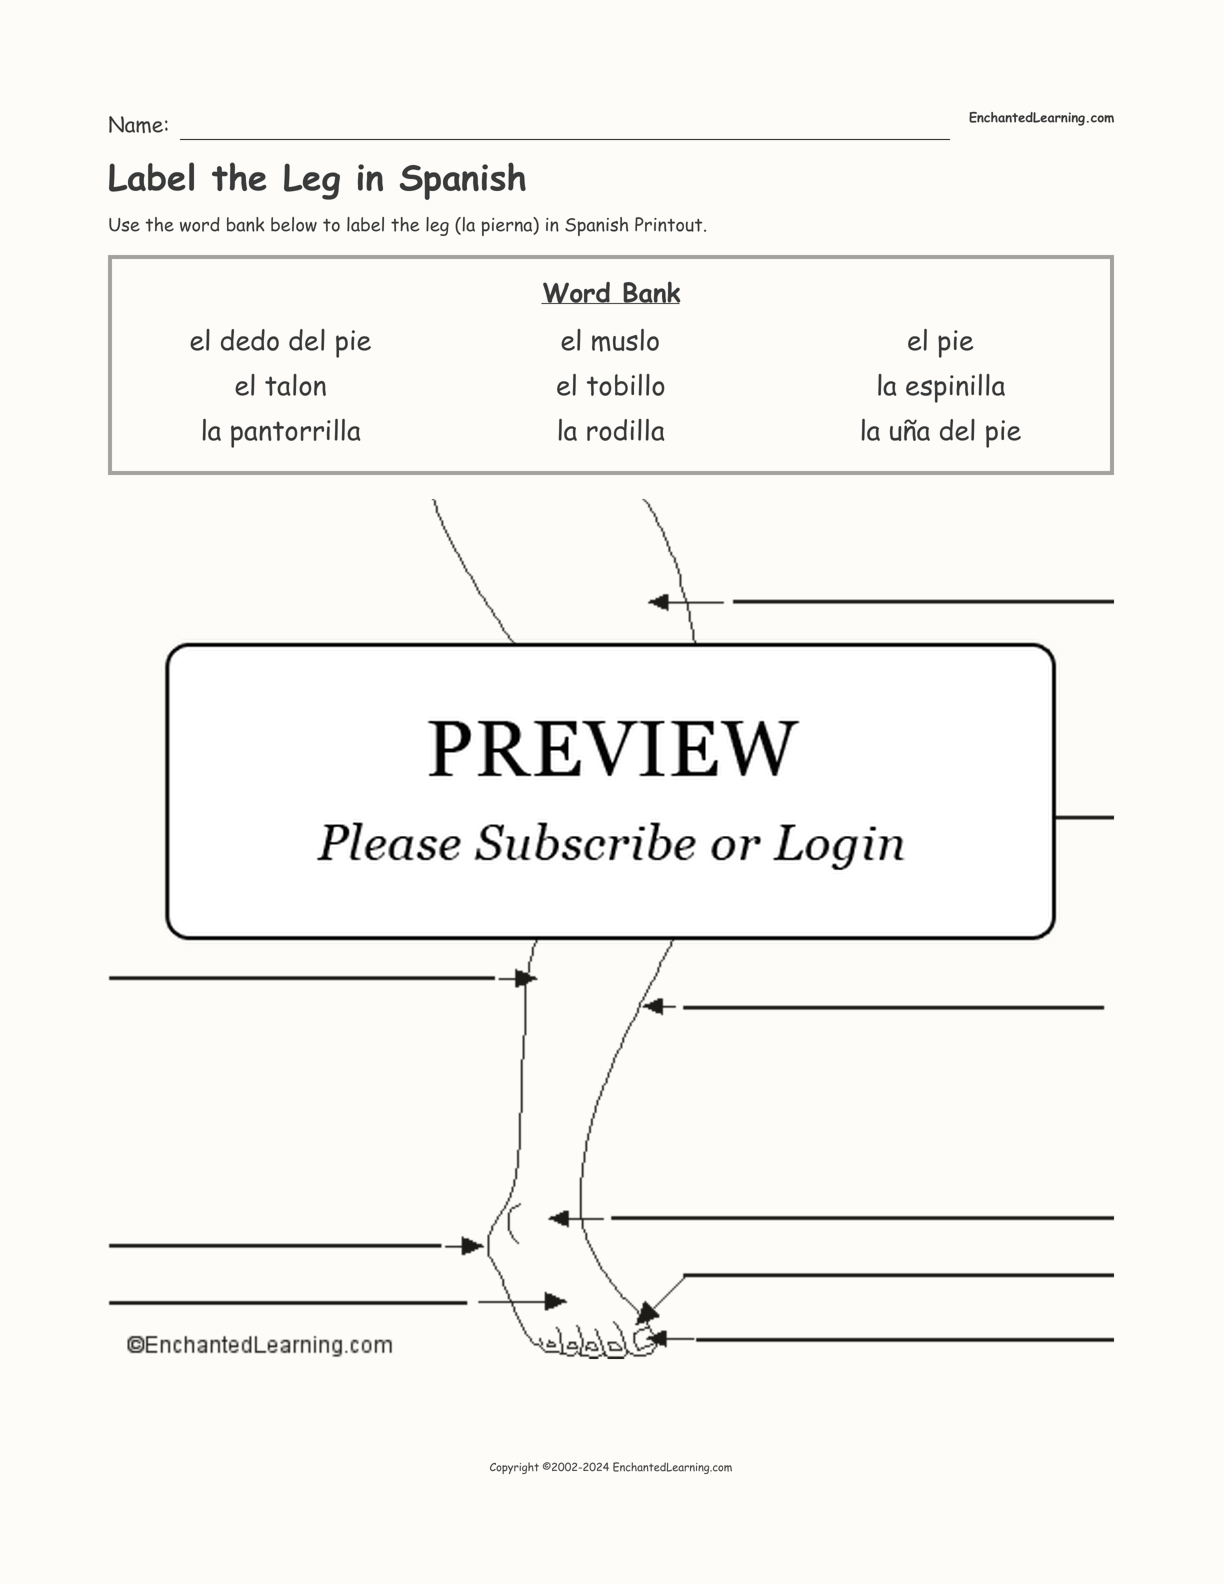 Label the Leg in Spanish interactive worksheet page 1